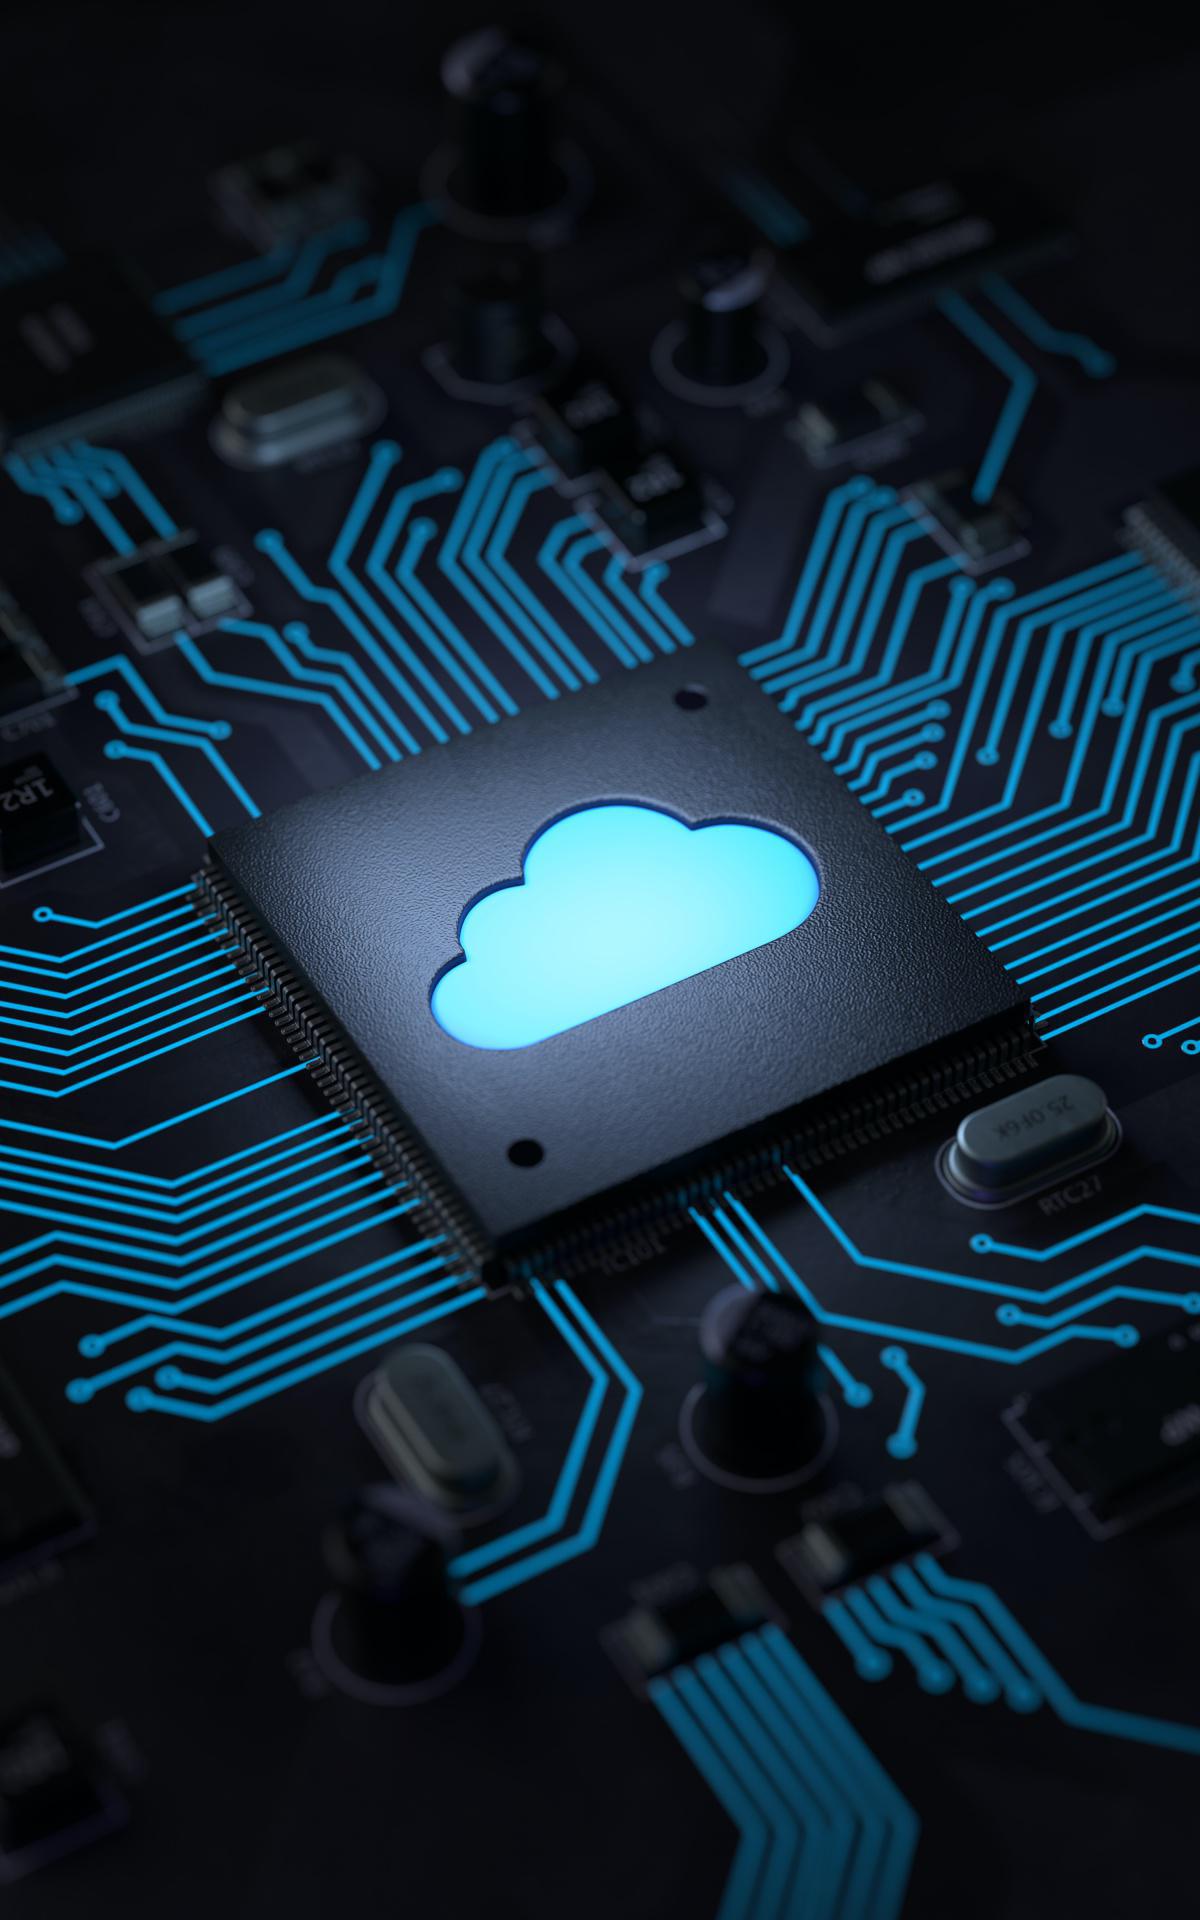 Microsoft: The New King of Cloud